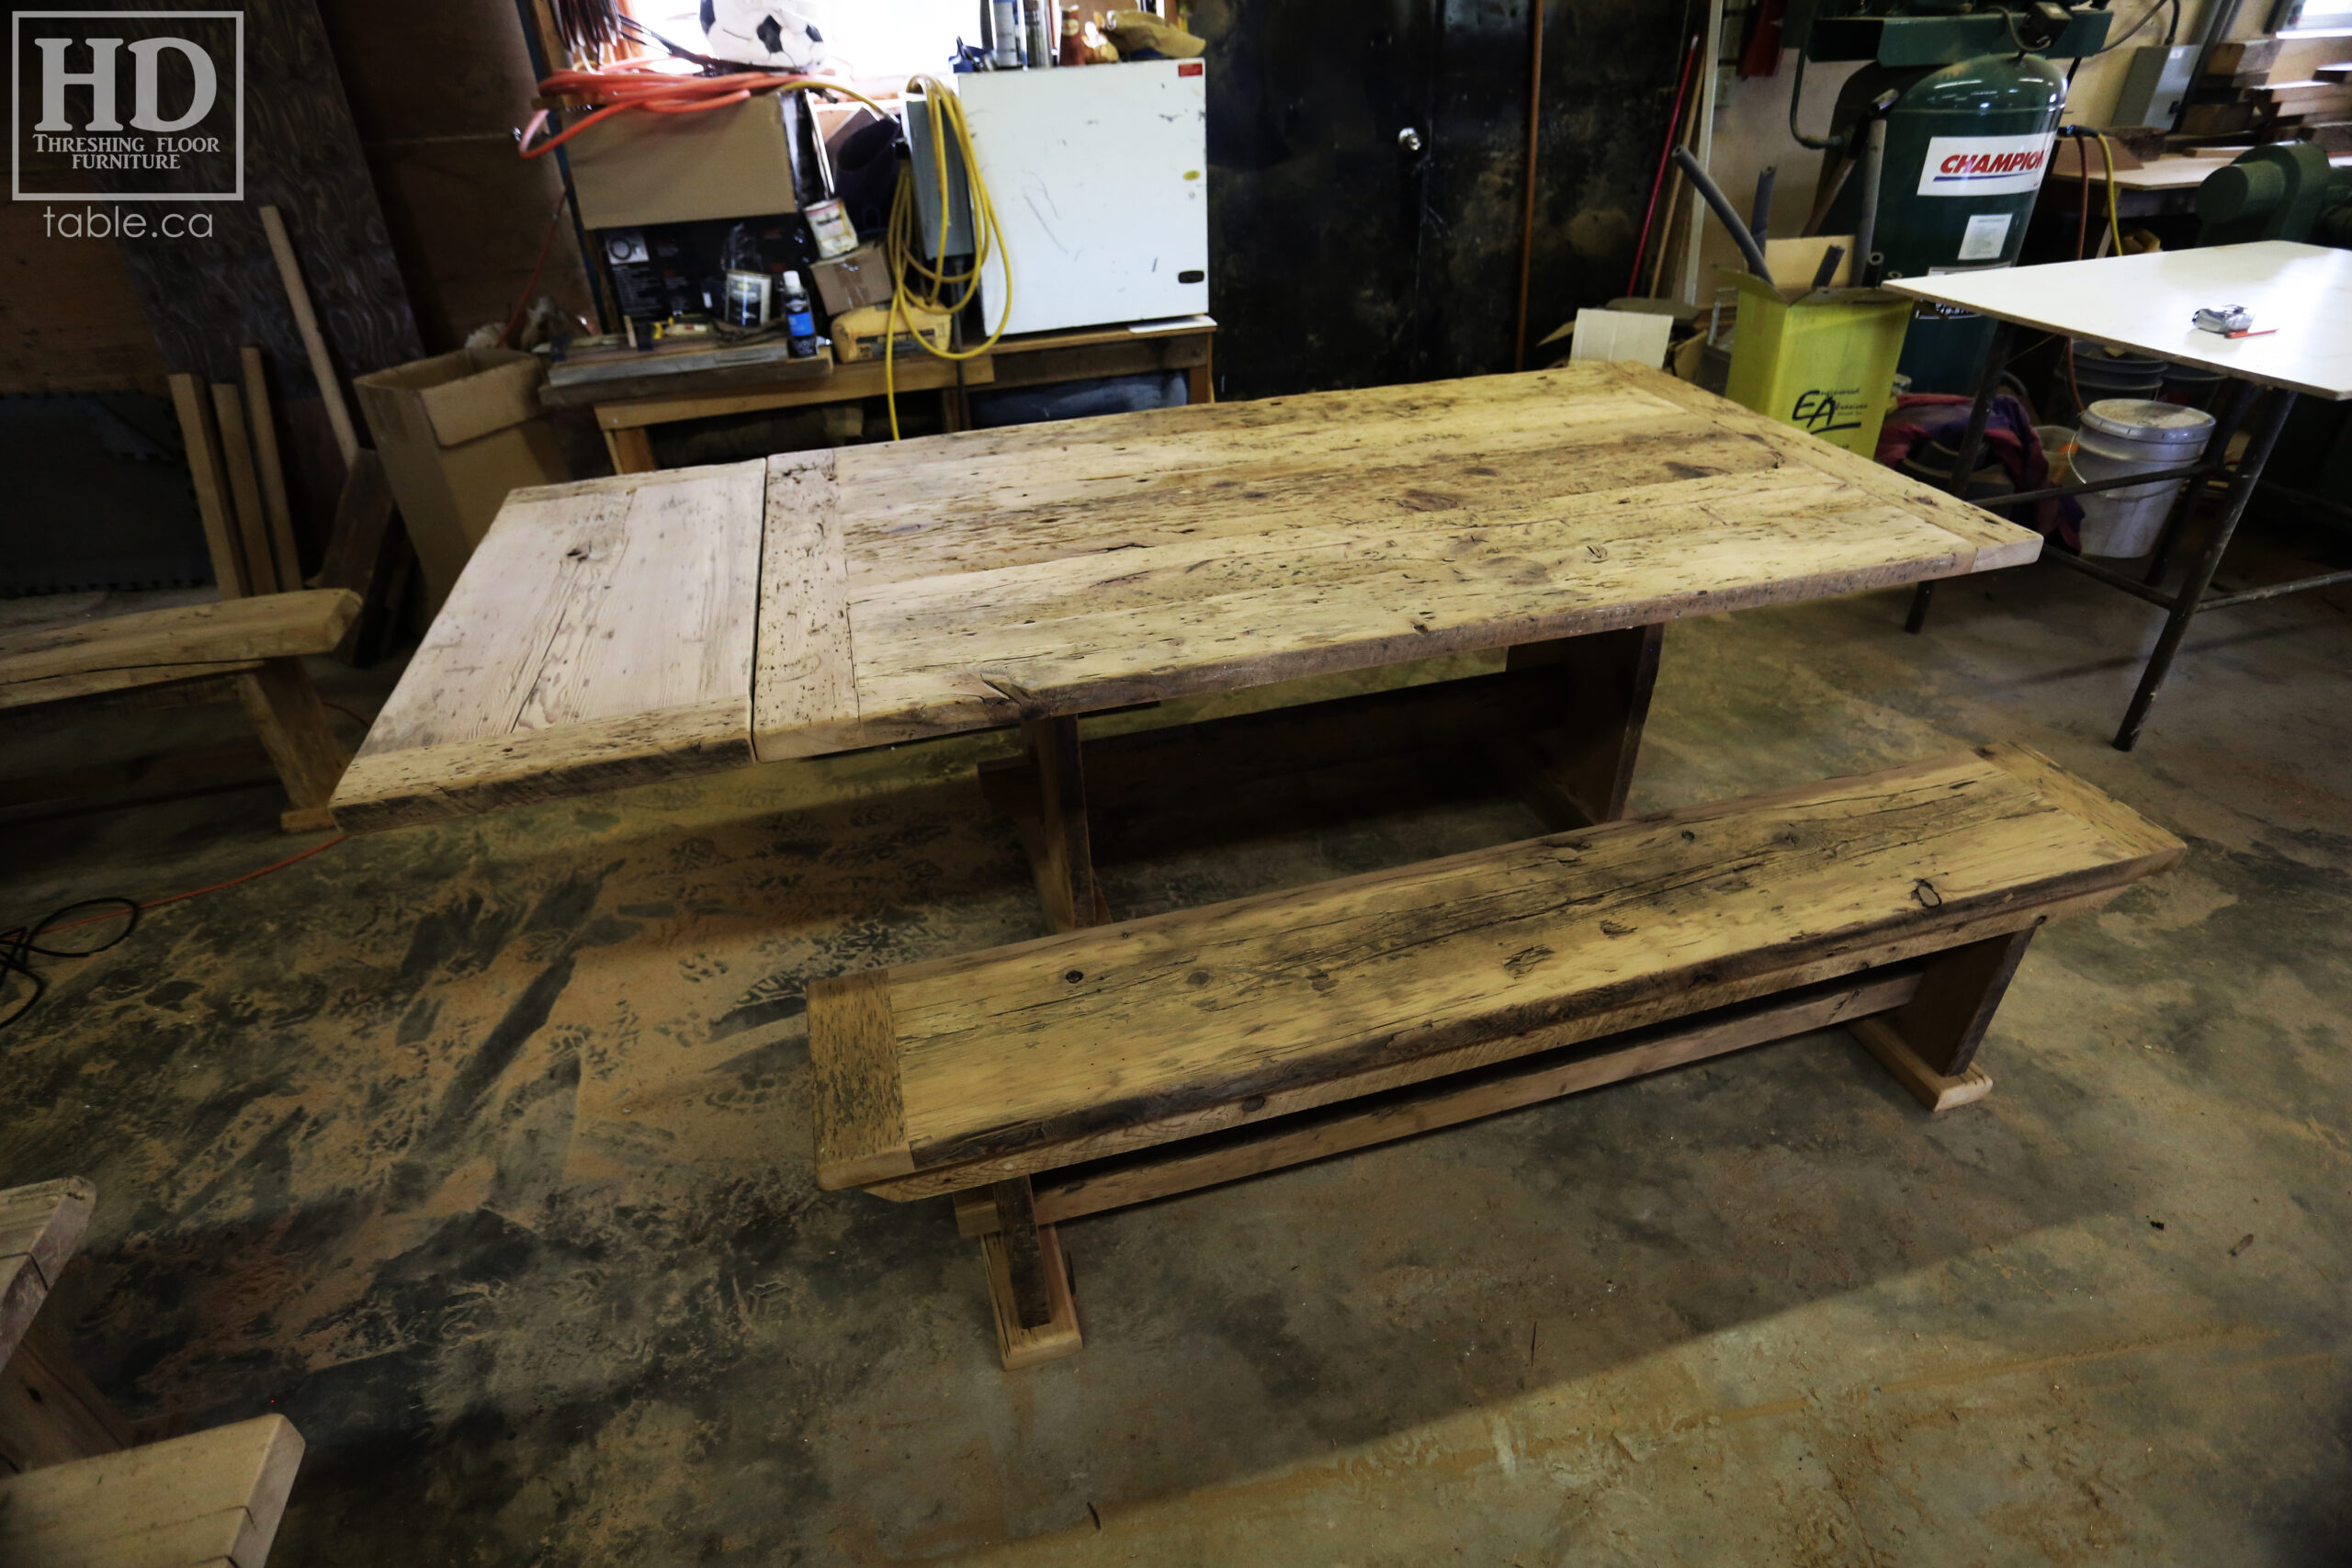 Reclaimed Wood Table & Bench by HD Threshing Floor Furniture / www.table.ca